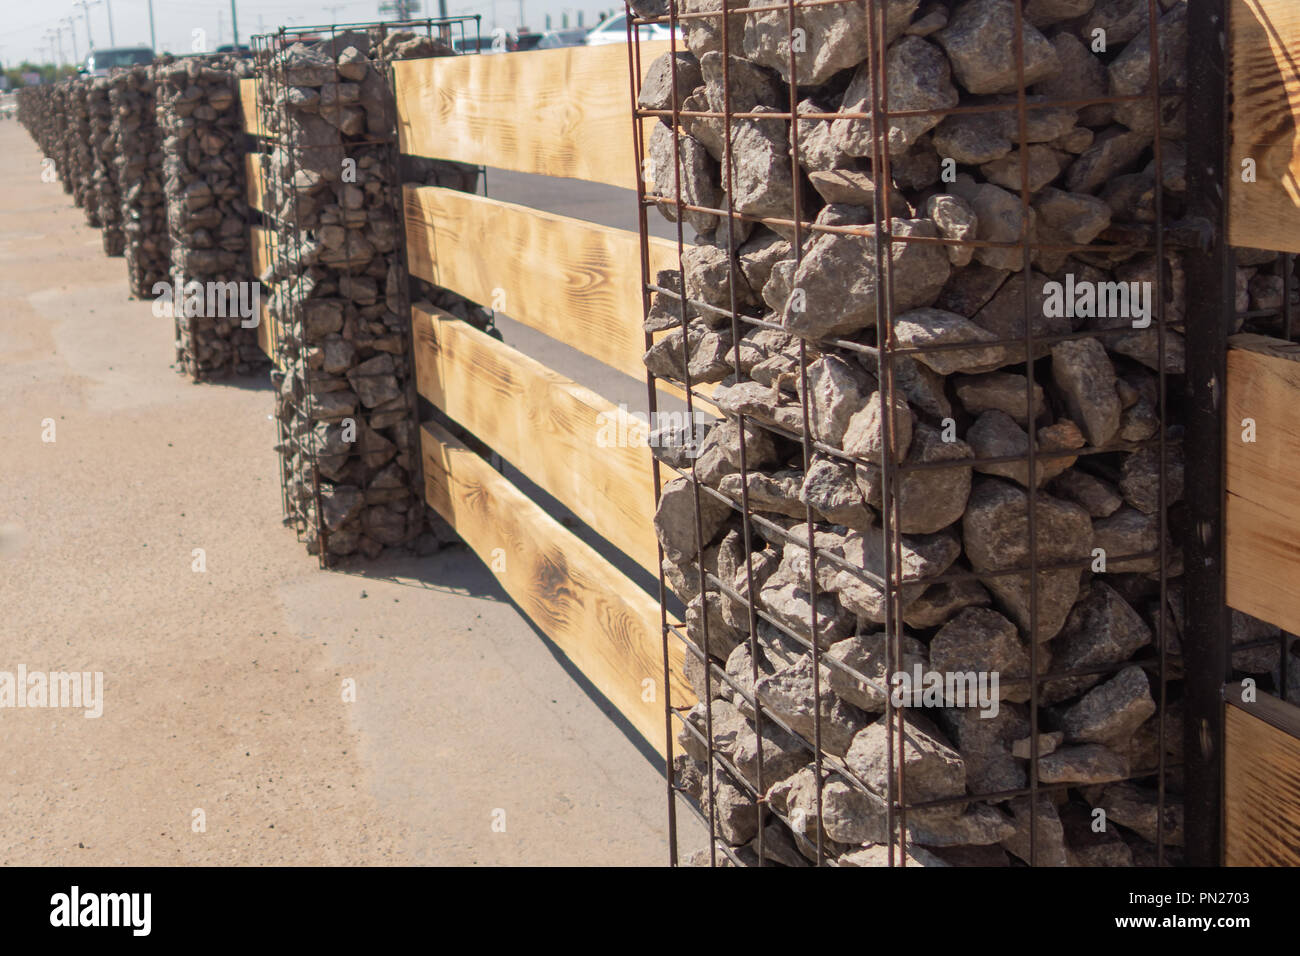 Wooden fence made of horizontal boards with stone pillars. The pillars are made of a metal frame with granite gravel embedded in it. Option of decorat Stock Photo